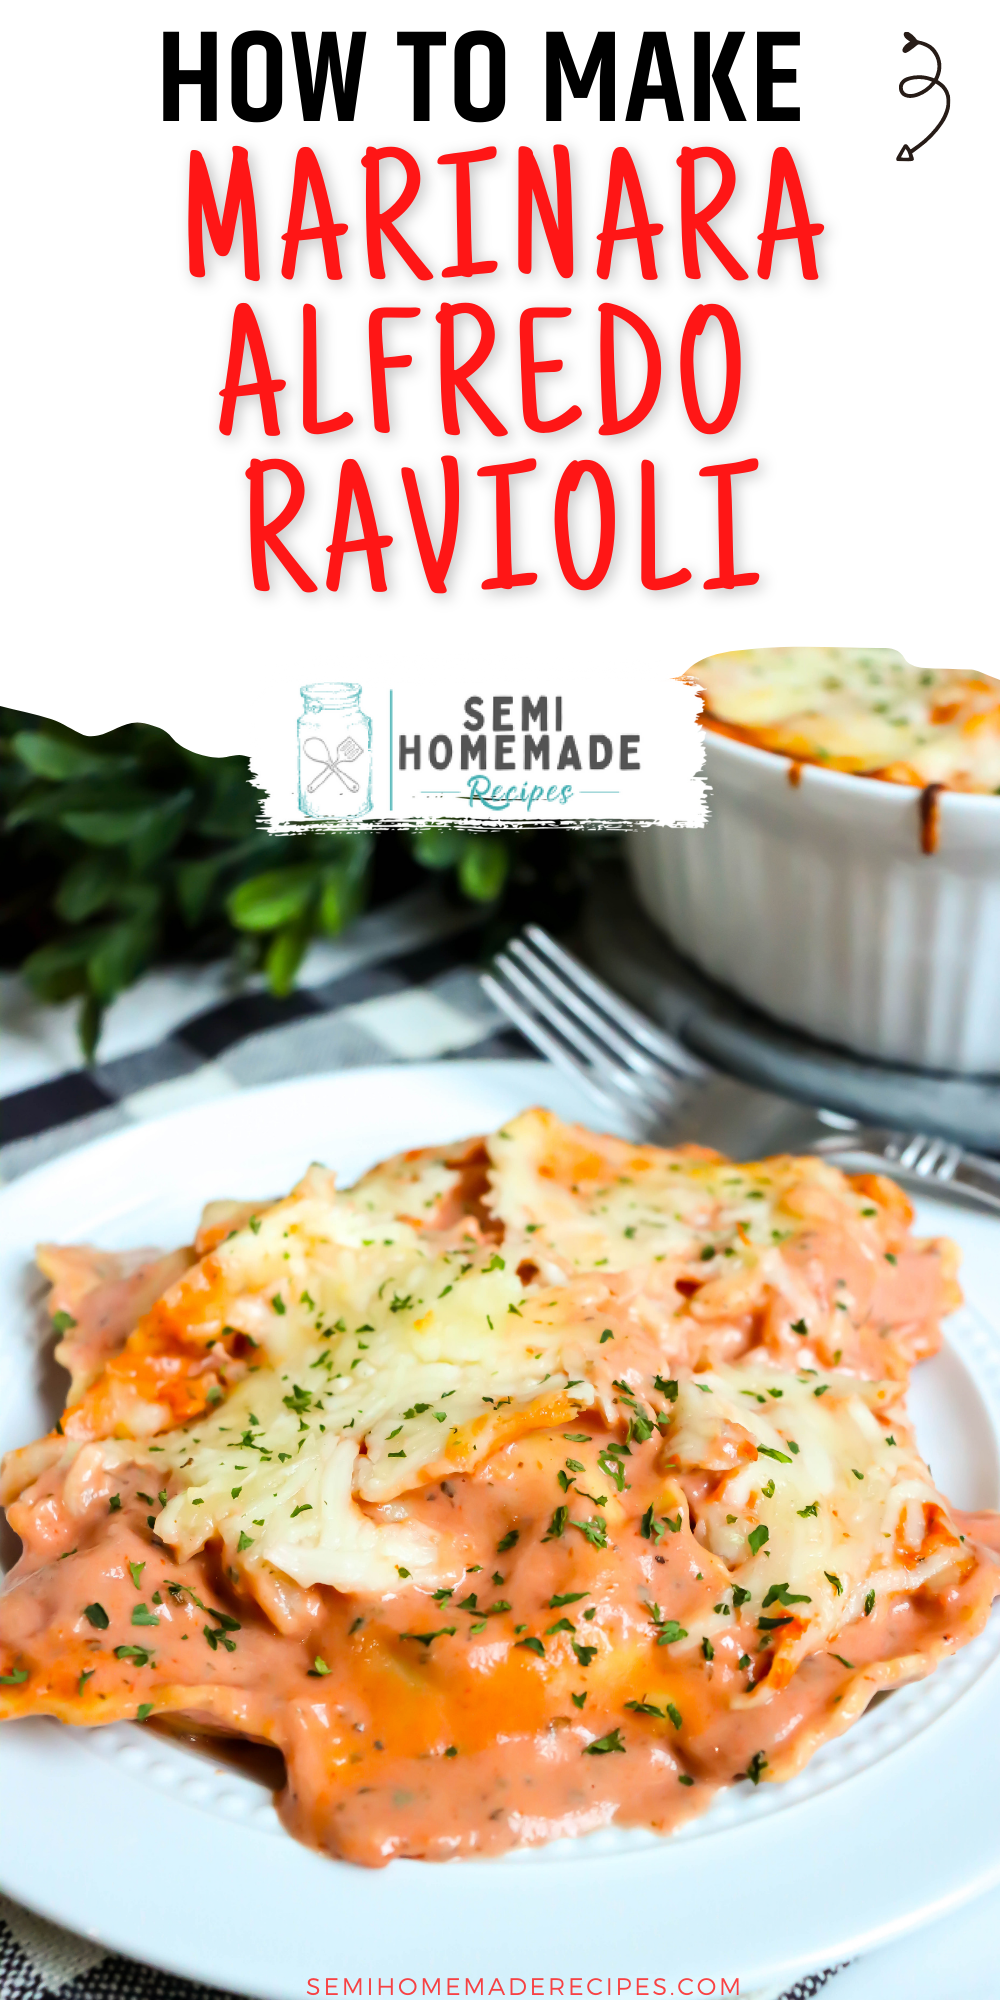 Marinara Alfredo Ravioli - a quick and easy meal with refrigerated cheese stuffed ravioli, marinara sauce, alfredo sauce and lots of mozzarella cheese. Great for busy weeknight or lazy weekend!